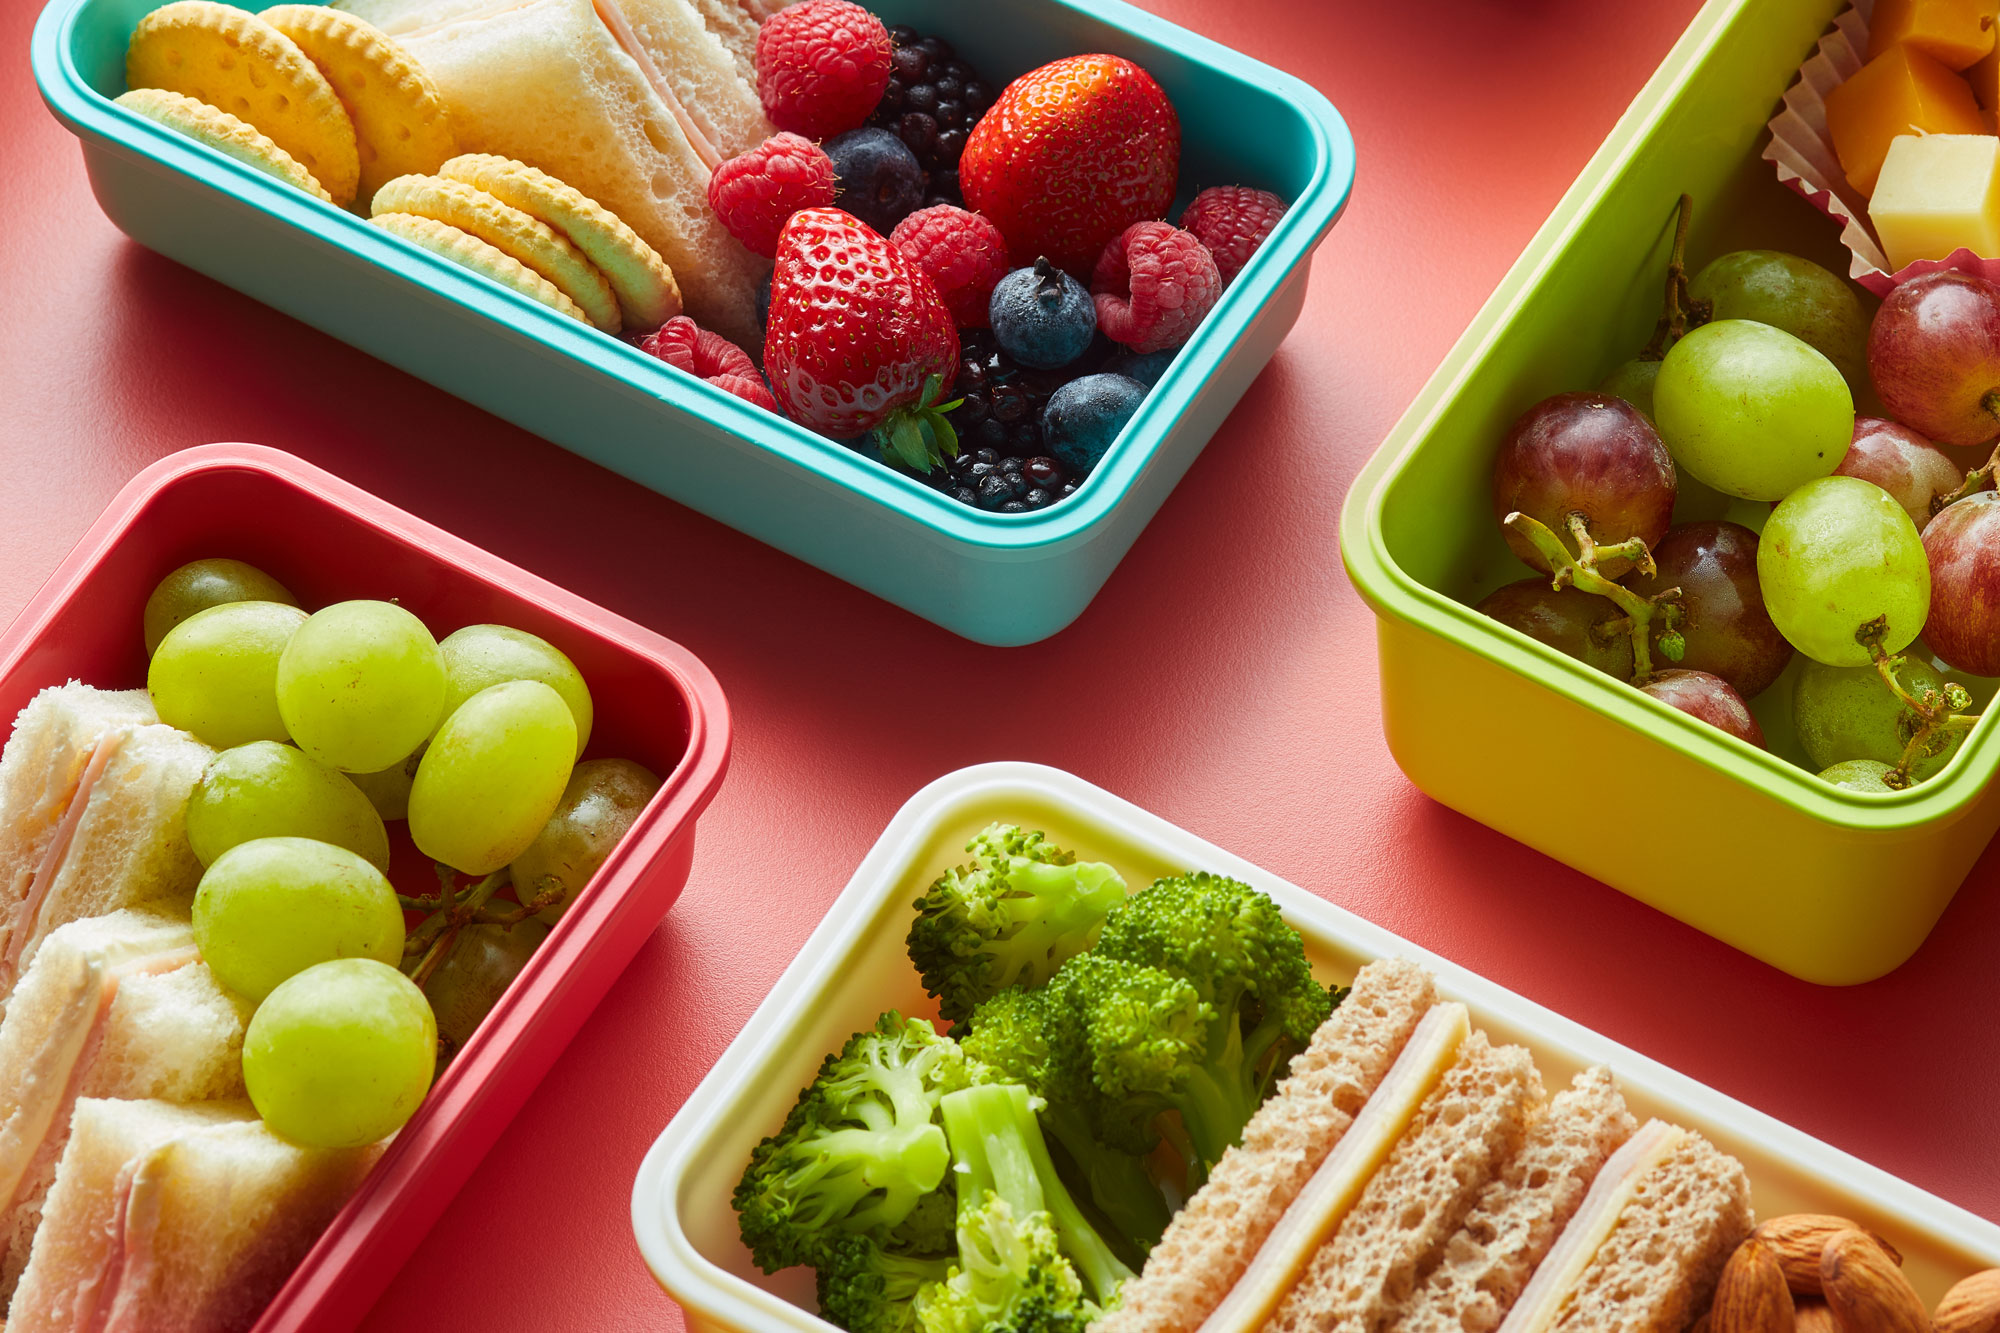 Healthy food in colorful lunchboxes